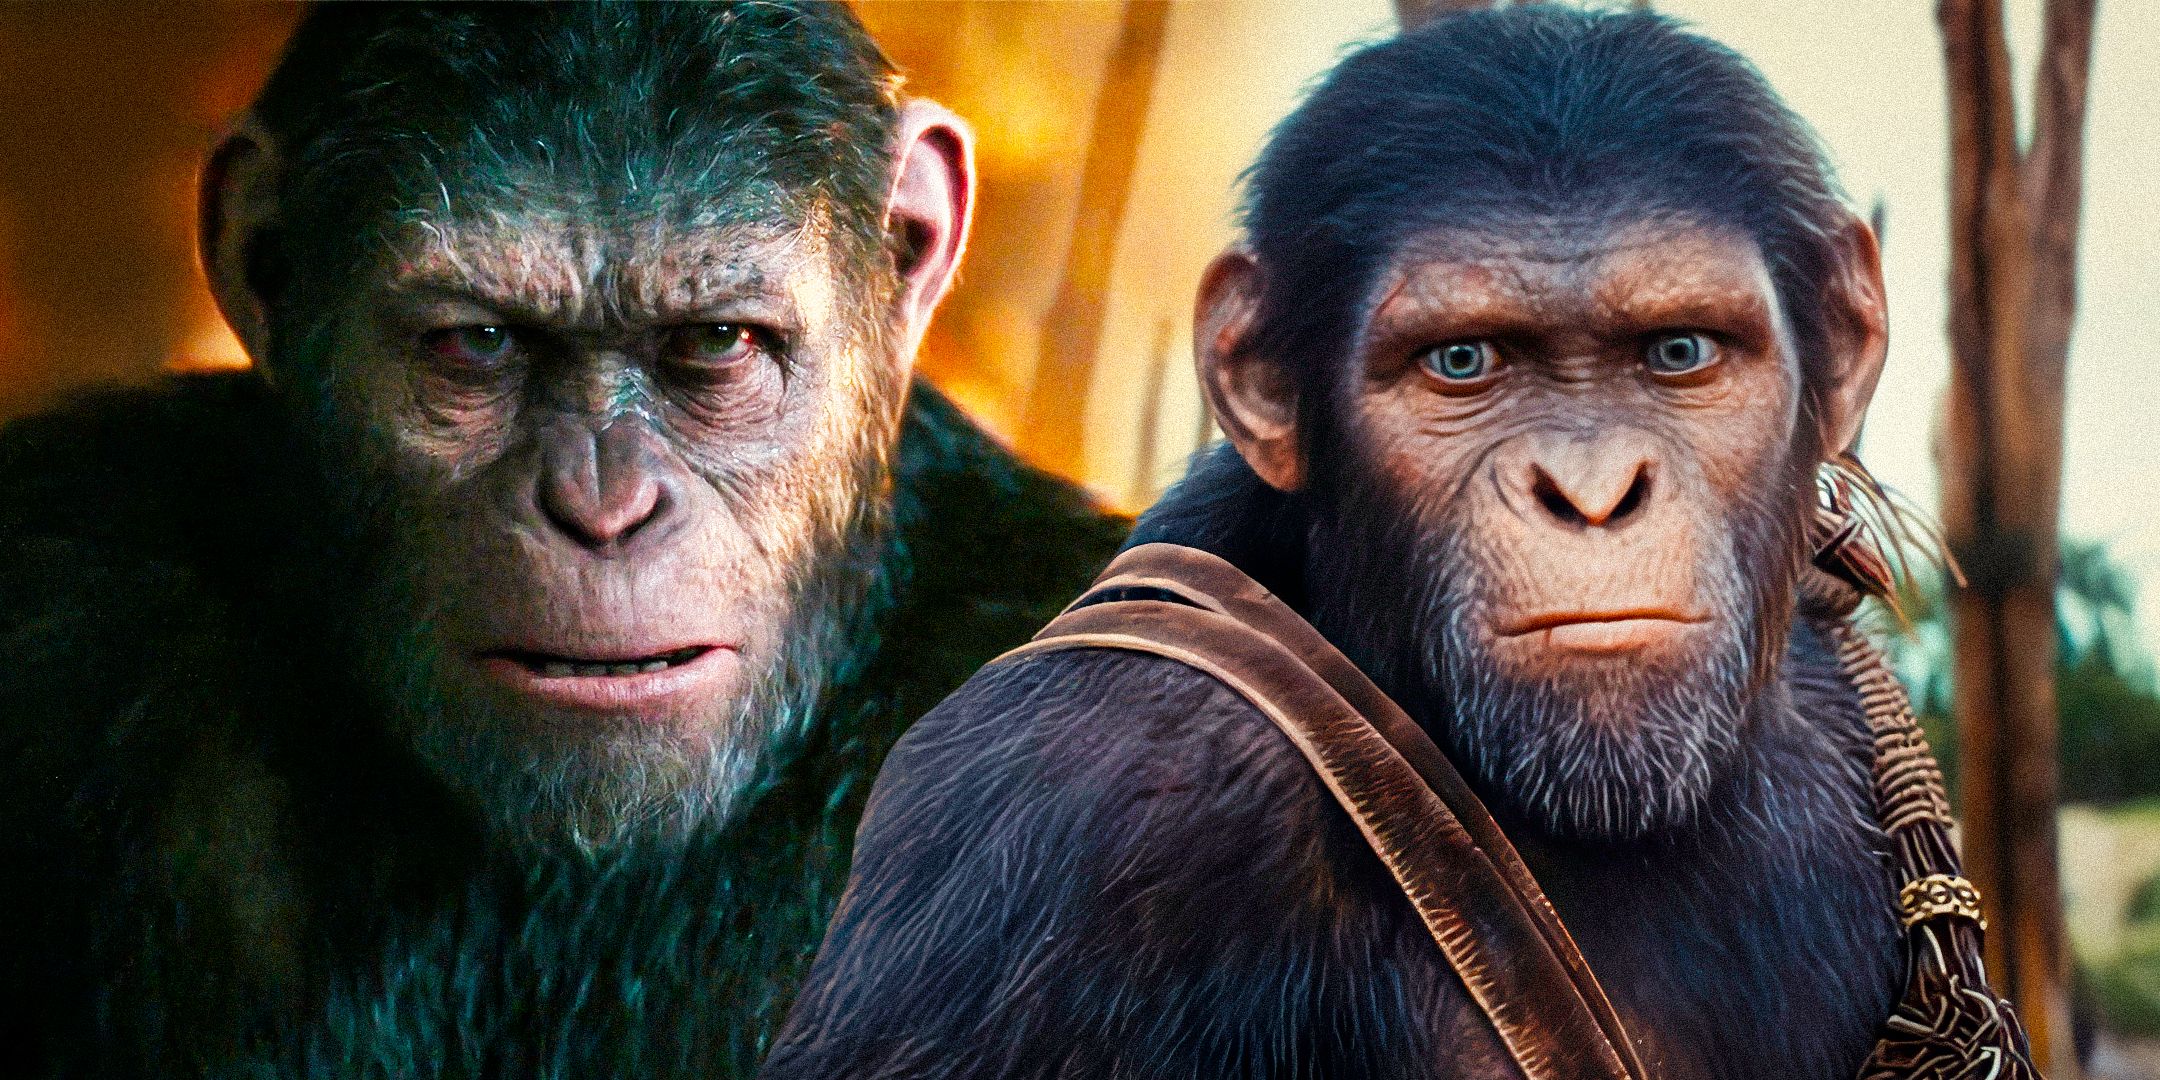 Is Noa Related To Caesar In Kingdom Of The Planet Of The Apes?